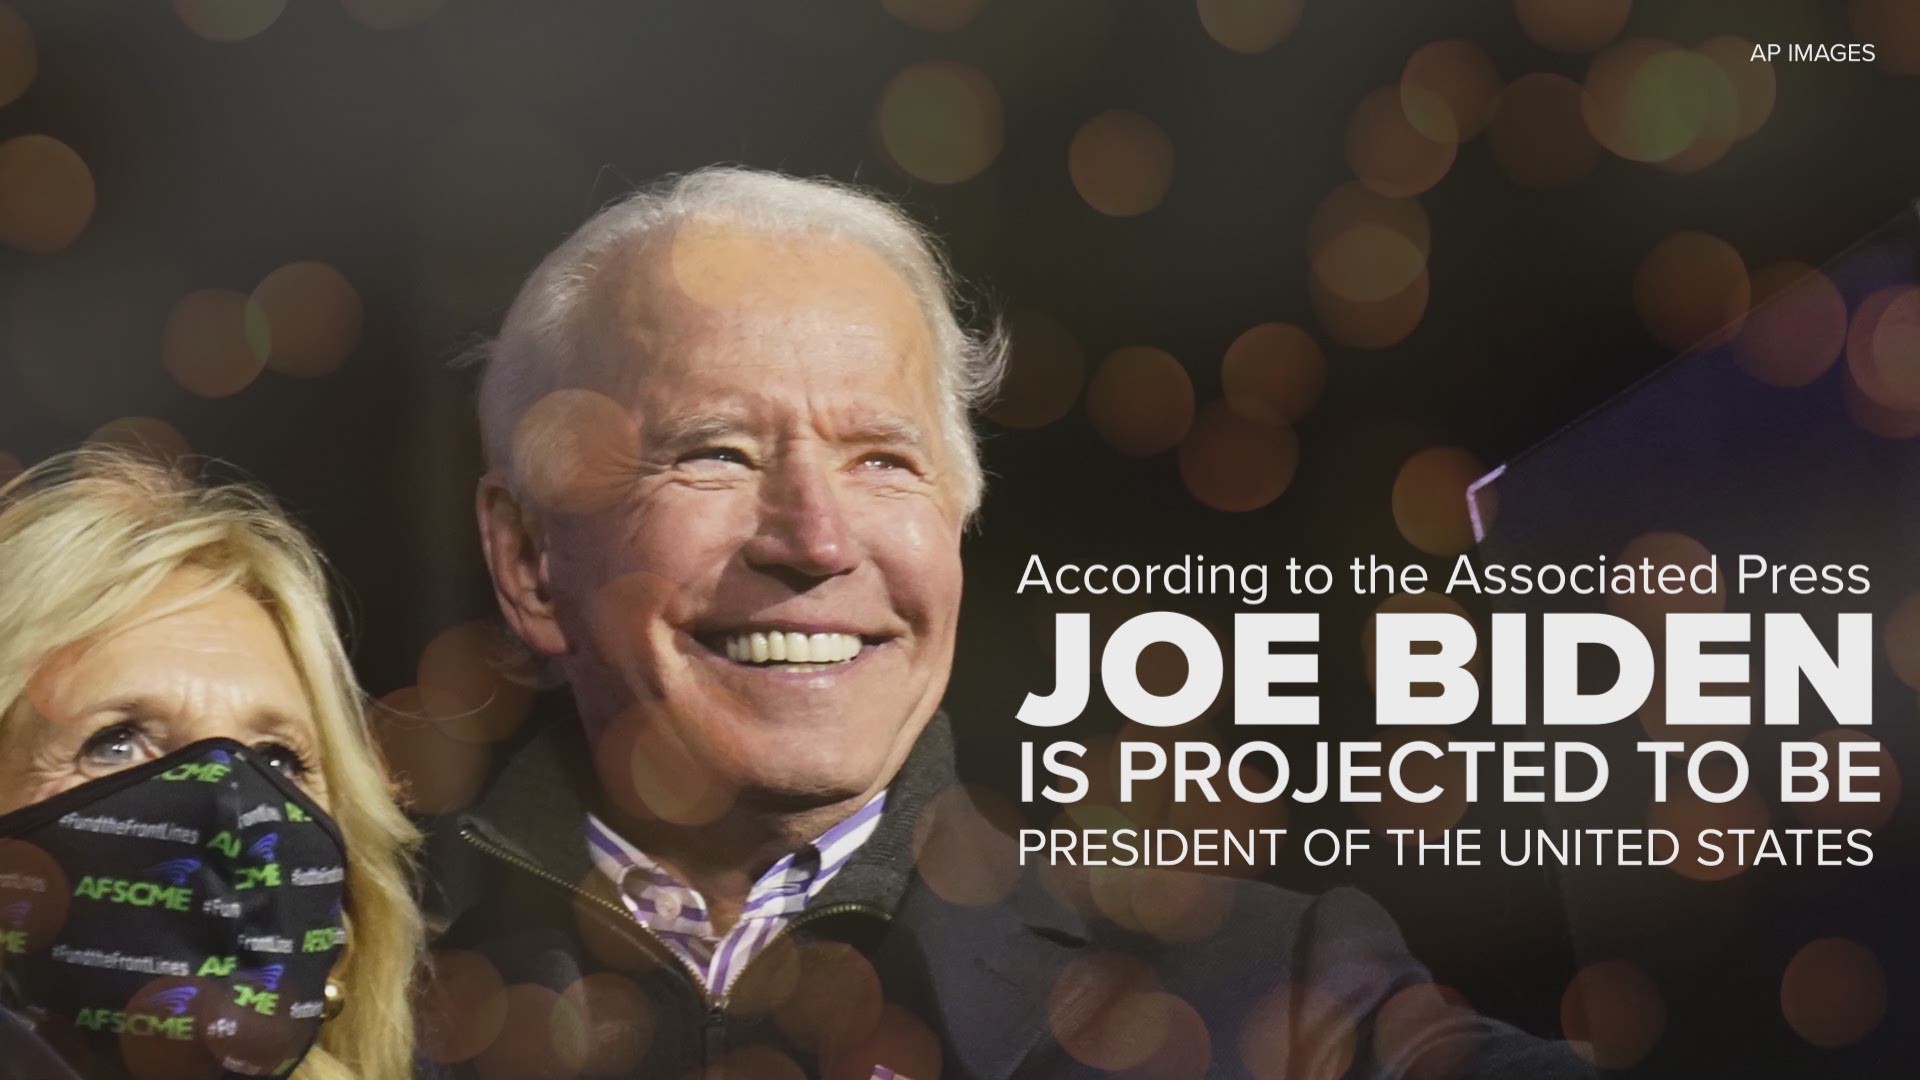 Democrat Joe Biden has won Pennsylvania, surpassing the 270 electoral vote threshold to take the White House and become the 46th president of the United States.